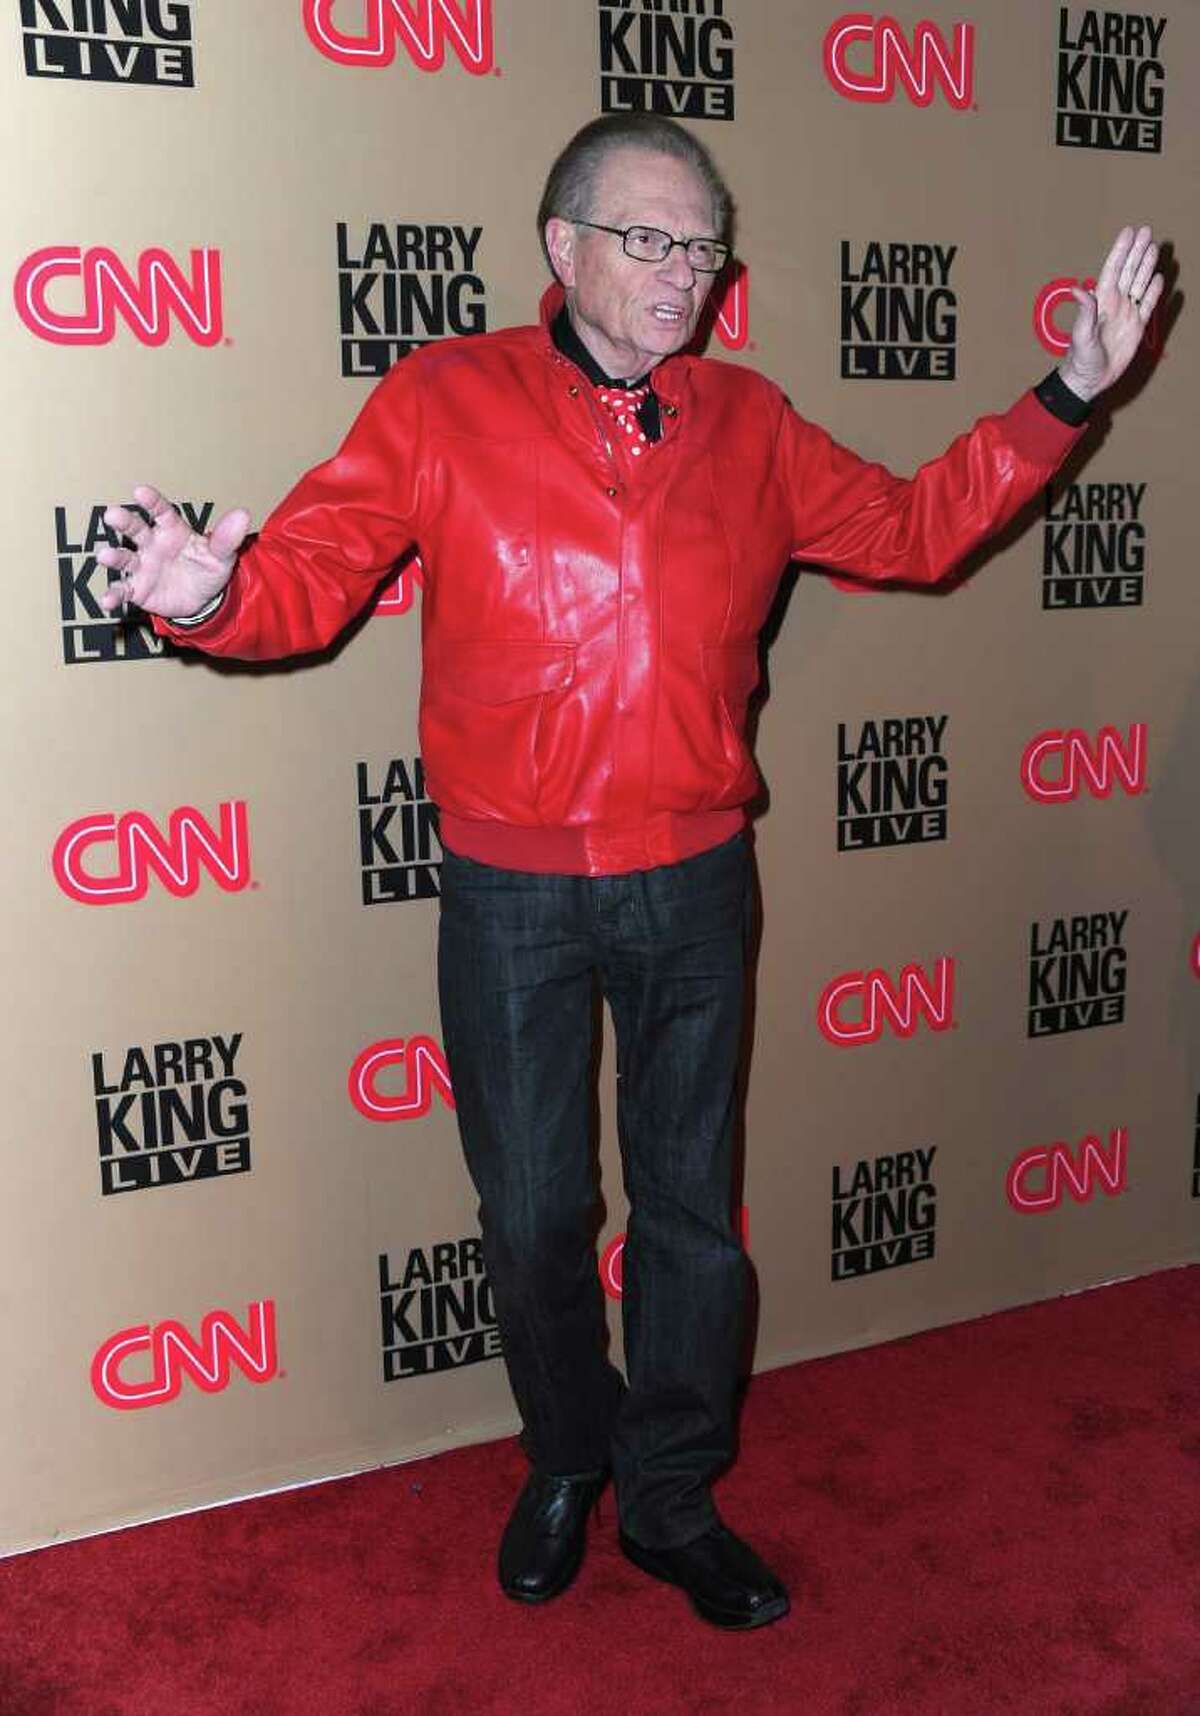 BEVERLY HILLS, CA - DECEMBER 16: TV host Larry King arrives at CNN's "Larry King Live" final broadcast party at Spago restaurant on December 16, 2010 in Beverly Hills, California. (Photo by Alberto E. Rodriguez/Getty Images) *** Local Caption *** Larry King